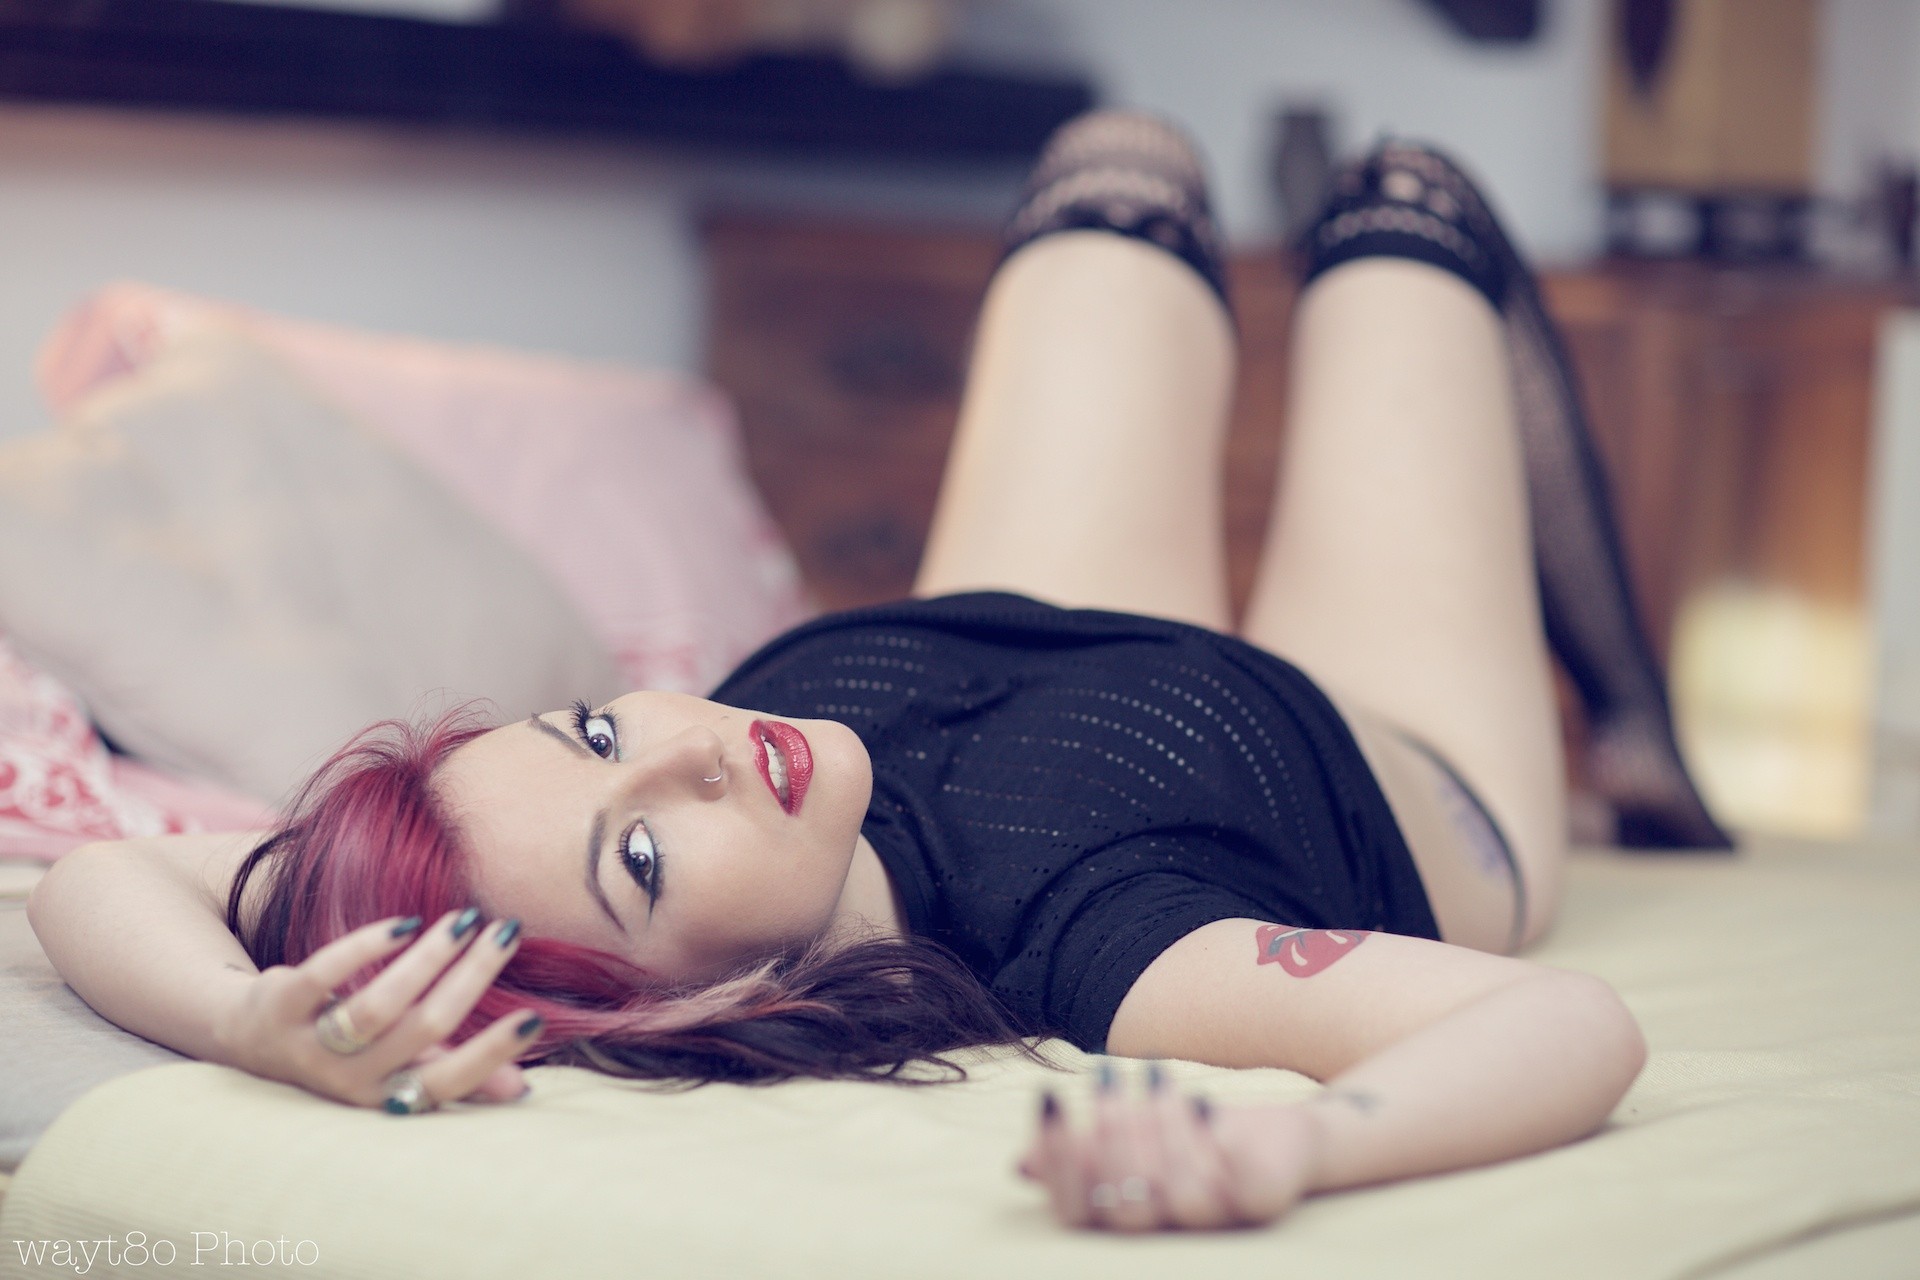 People 1920x1280 women redhead lying down legs up stockings makeup dyed hair painted nails inked girls red lipstick looking at viewer lying on back women indoors indoors